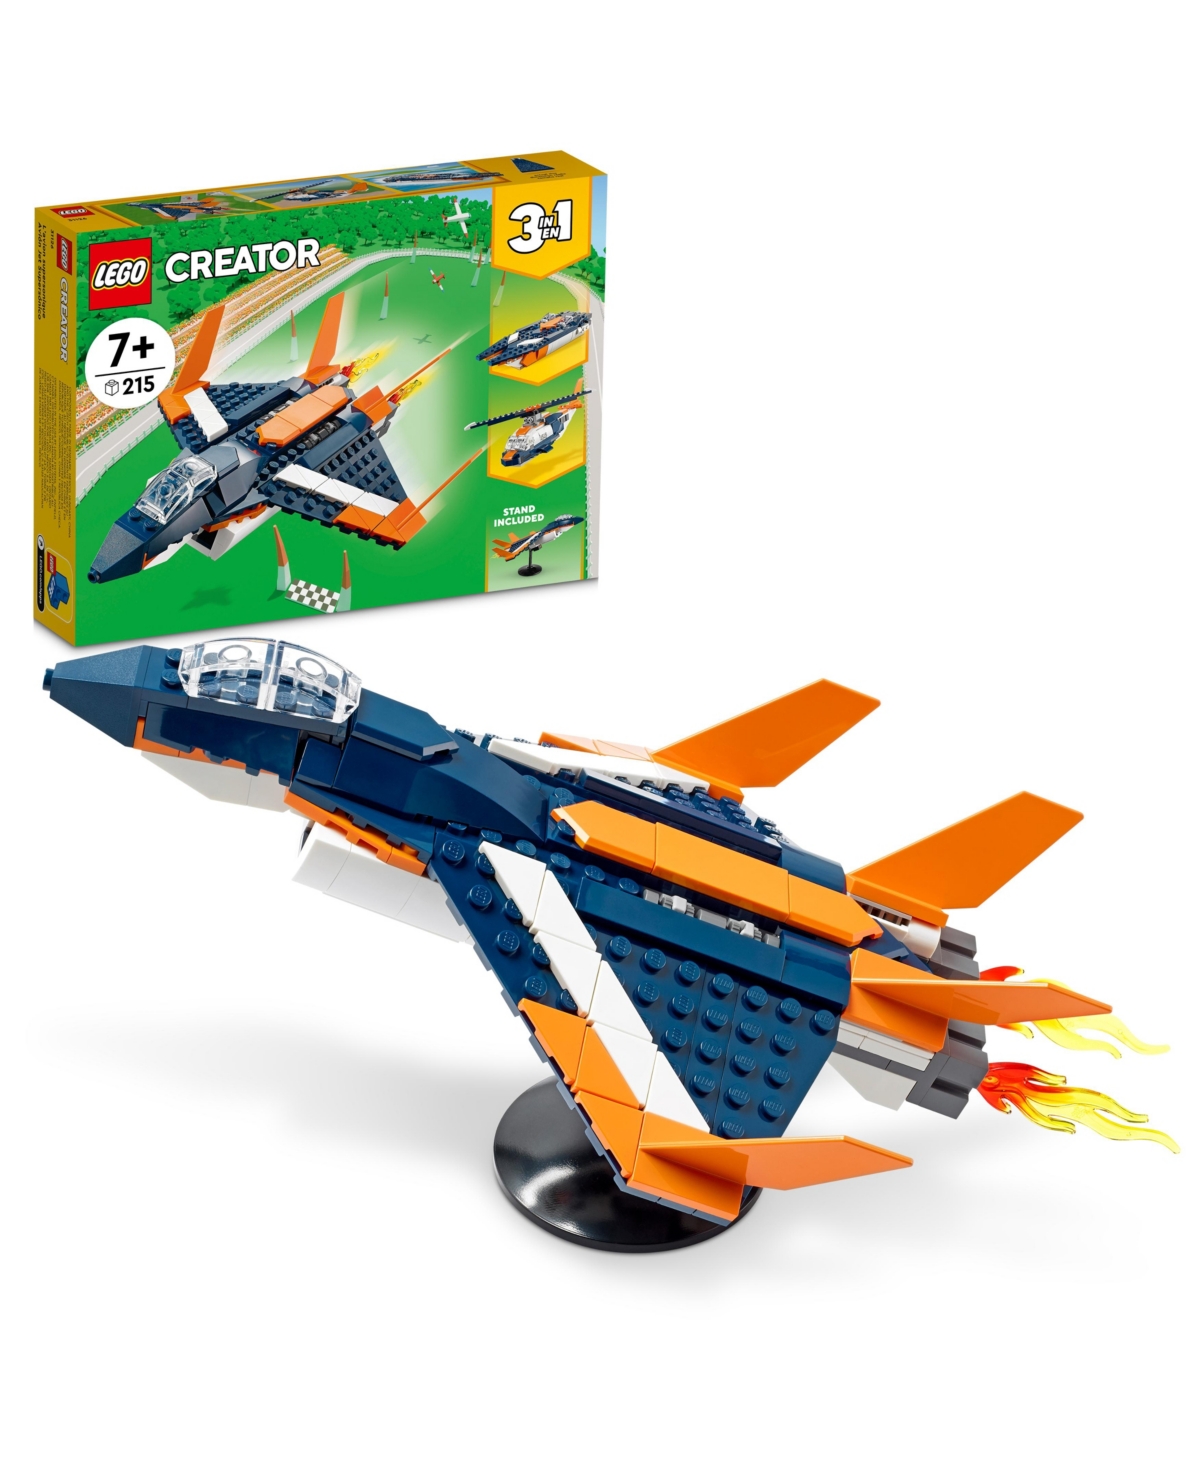 Lego Kids' Creator 31126 3-in-1 Supersonic Jet Helicopter & Powerboat Toy Building Set In Multiple